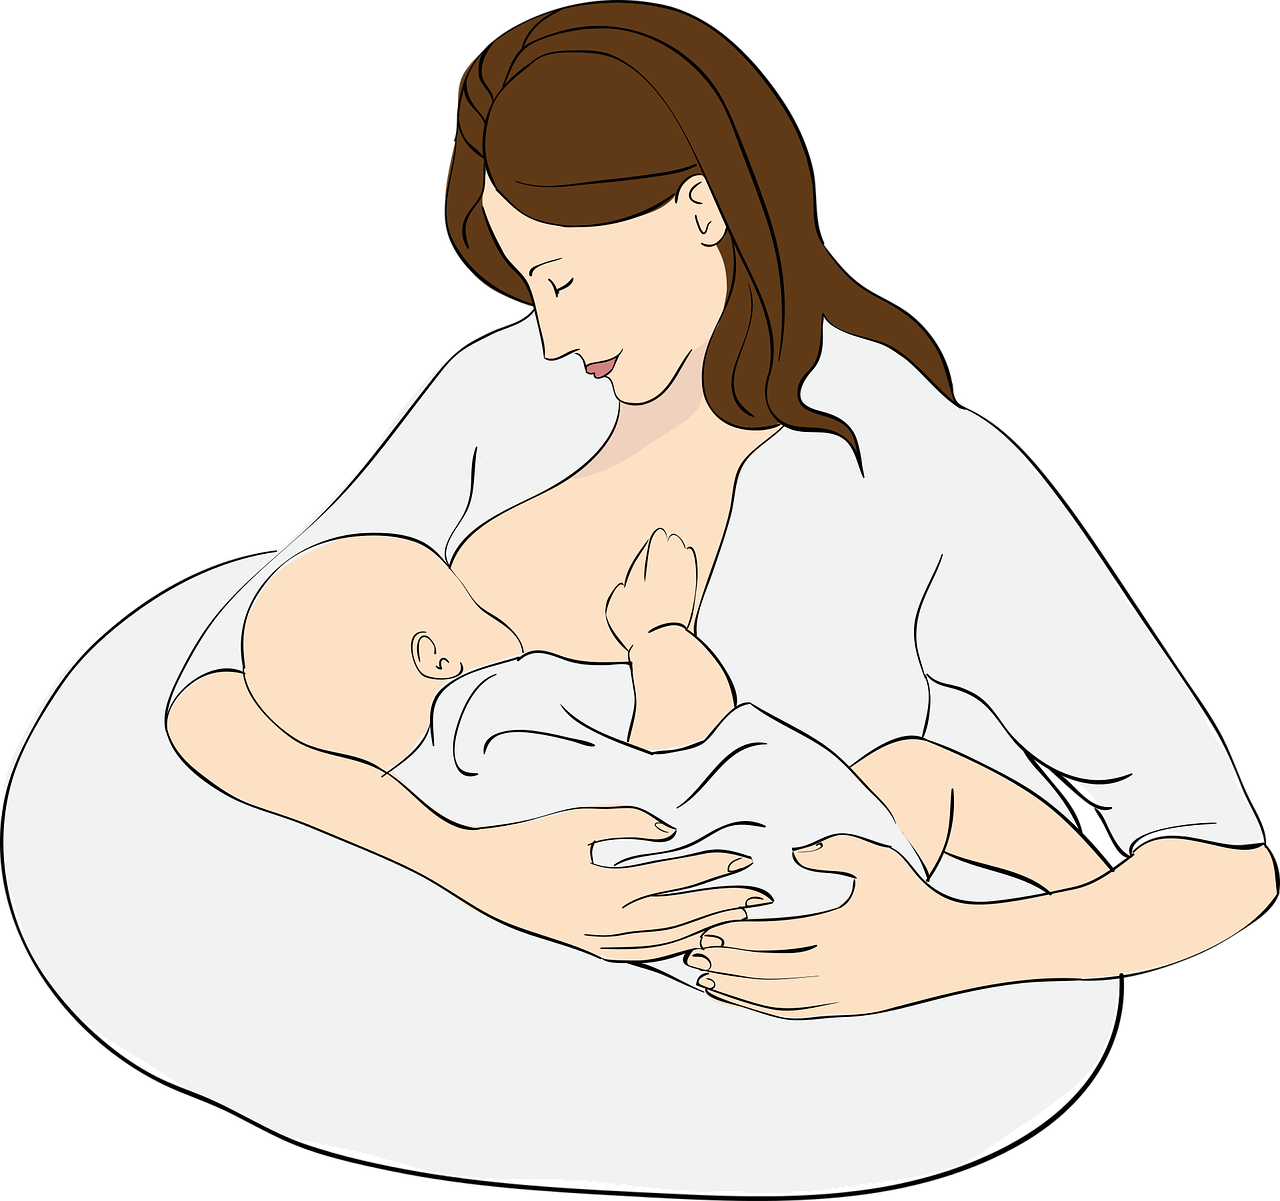 Alternative human breast milk recipe that was used for decades prior to commercial infant formula